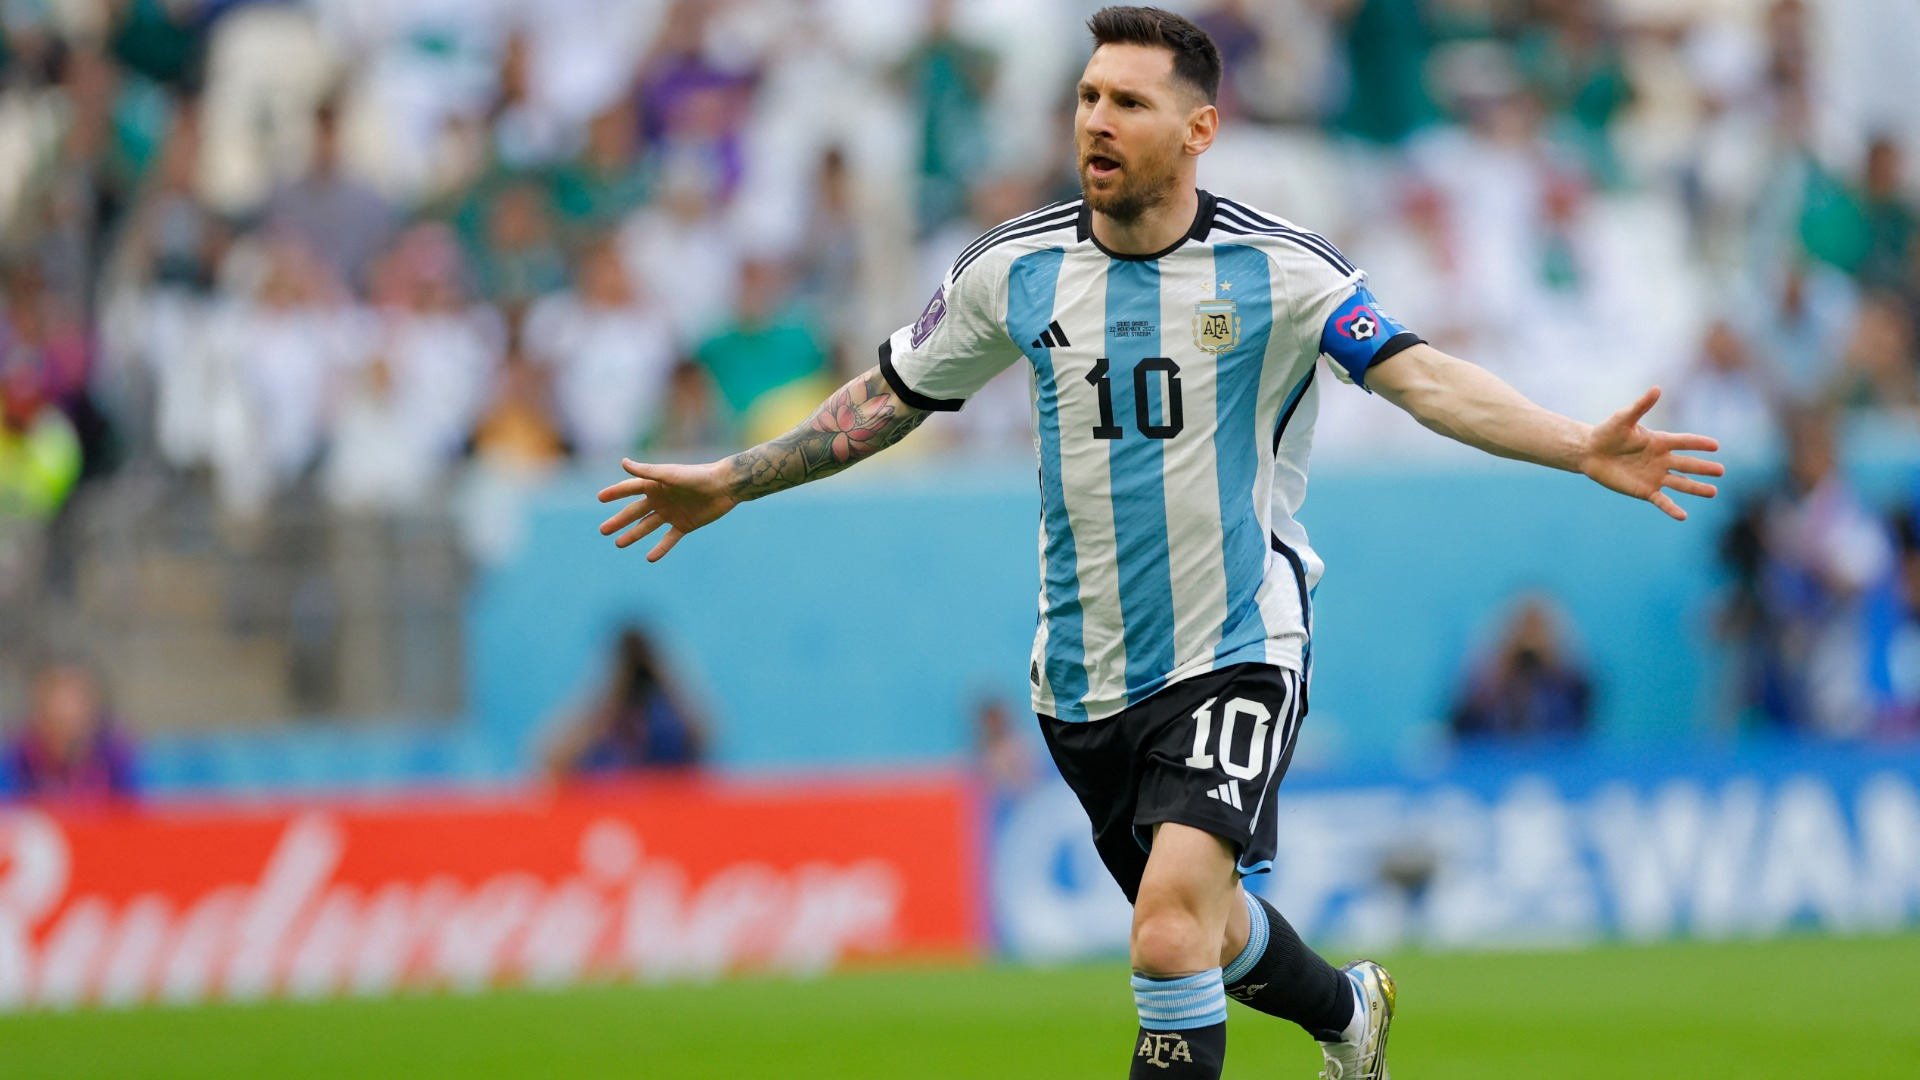 Messi Shares a Strong Message After Argentina's World Cup Group Stage Defeat vs. Saudi Arabia - PSG Talk